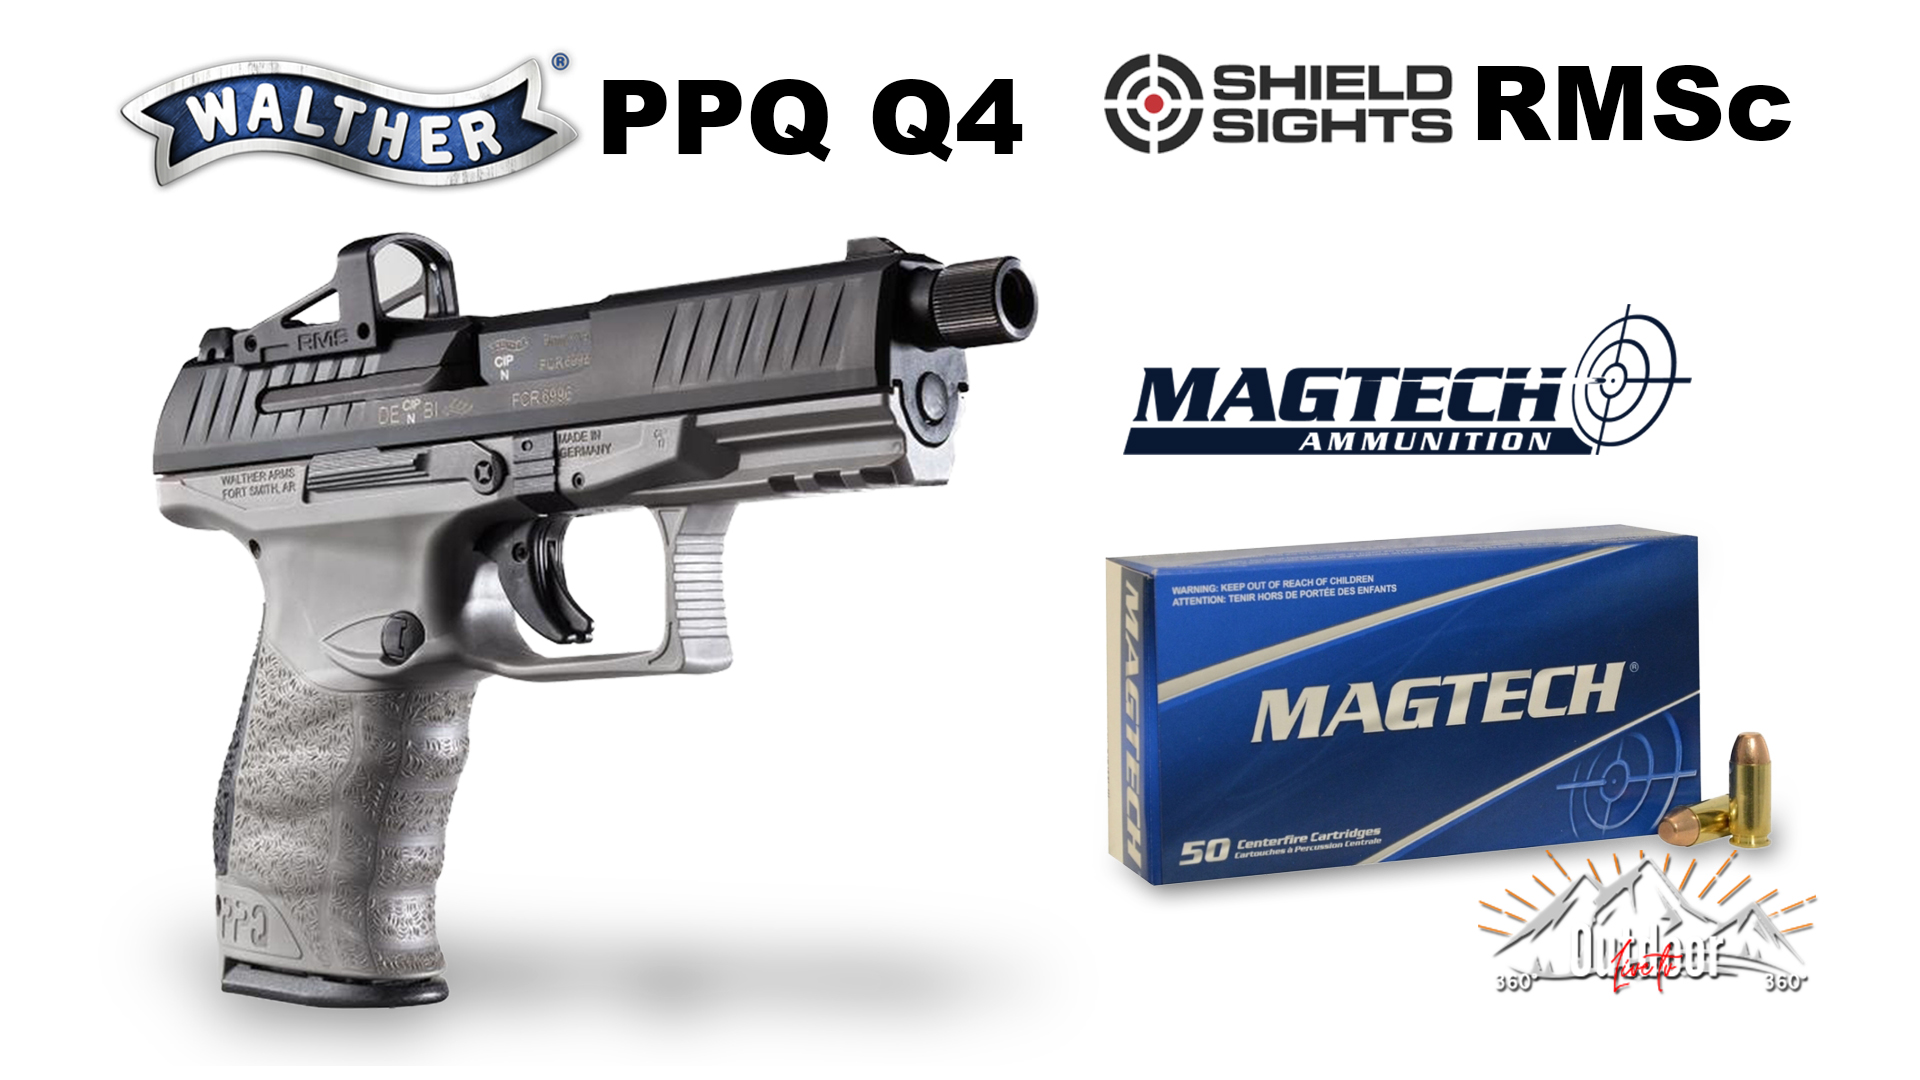 Walther PPQ Q4 4 6″